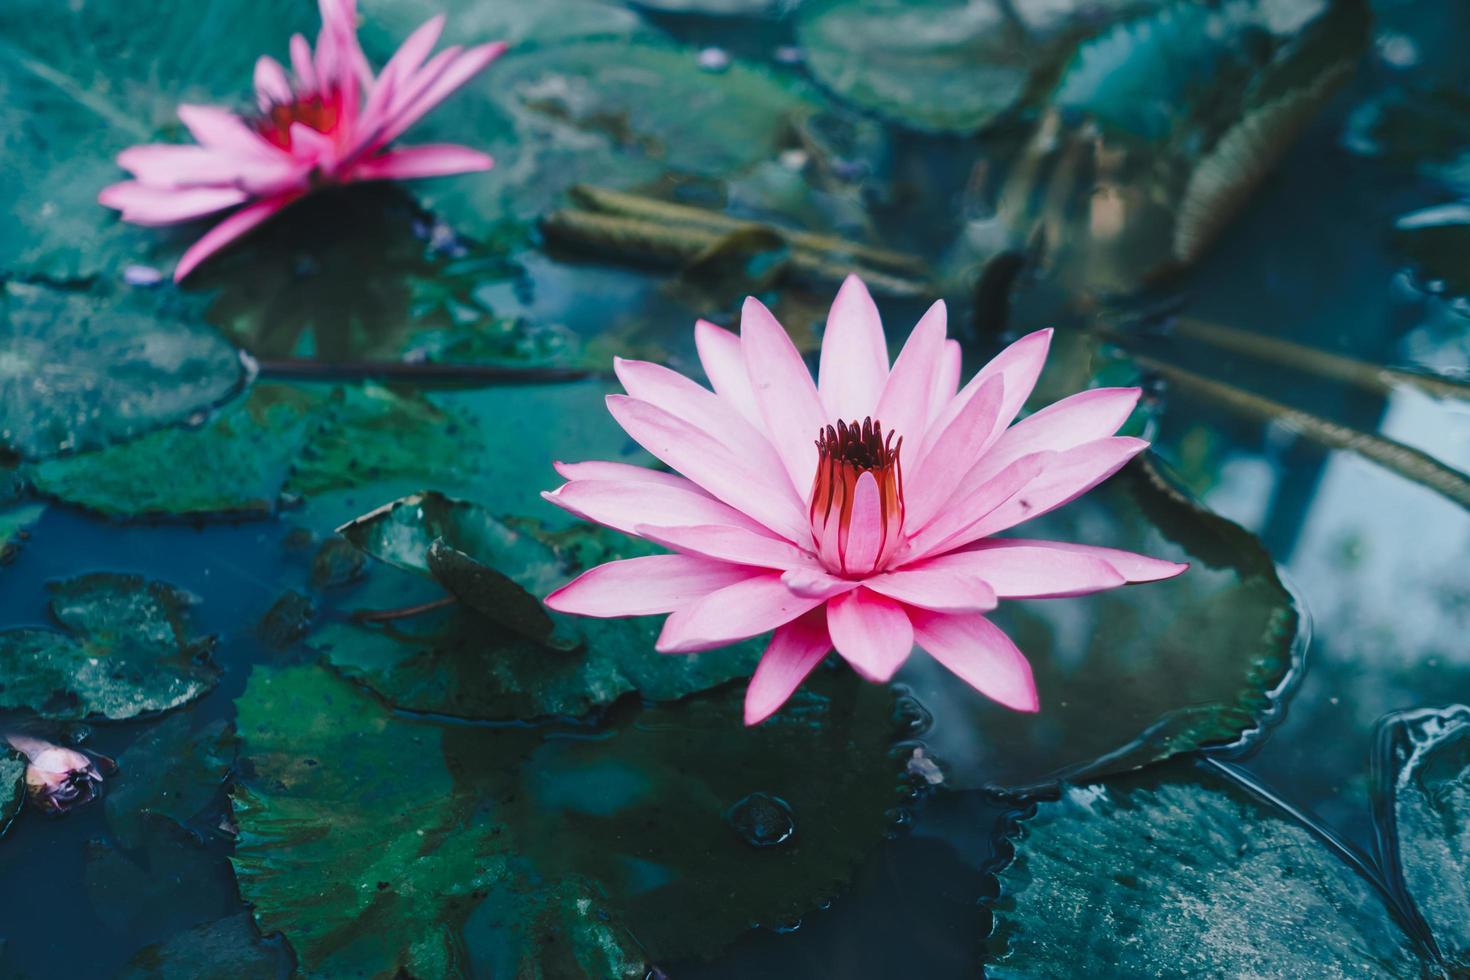 Pink lotus in a pond in the morning at a park, nature background. photo